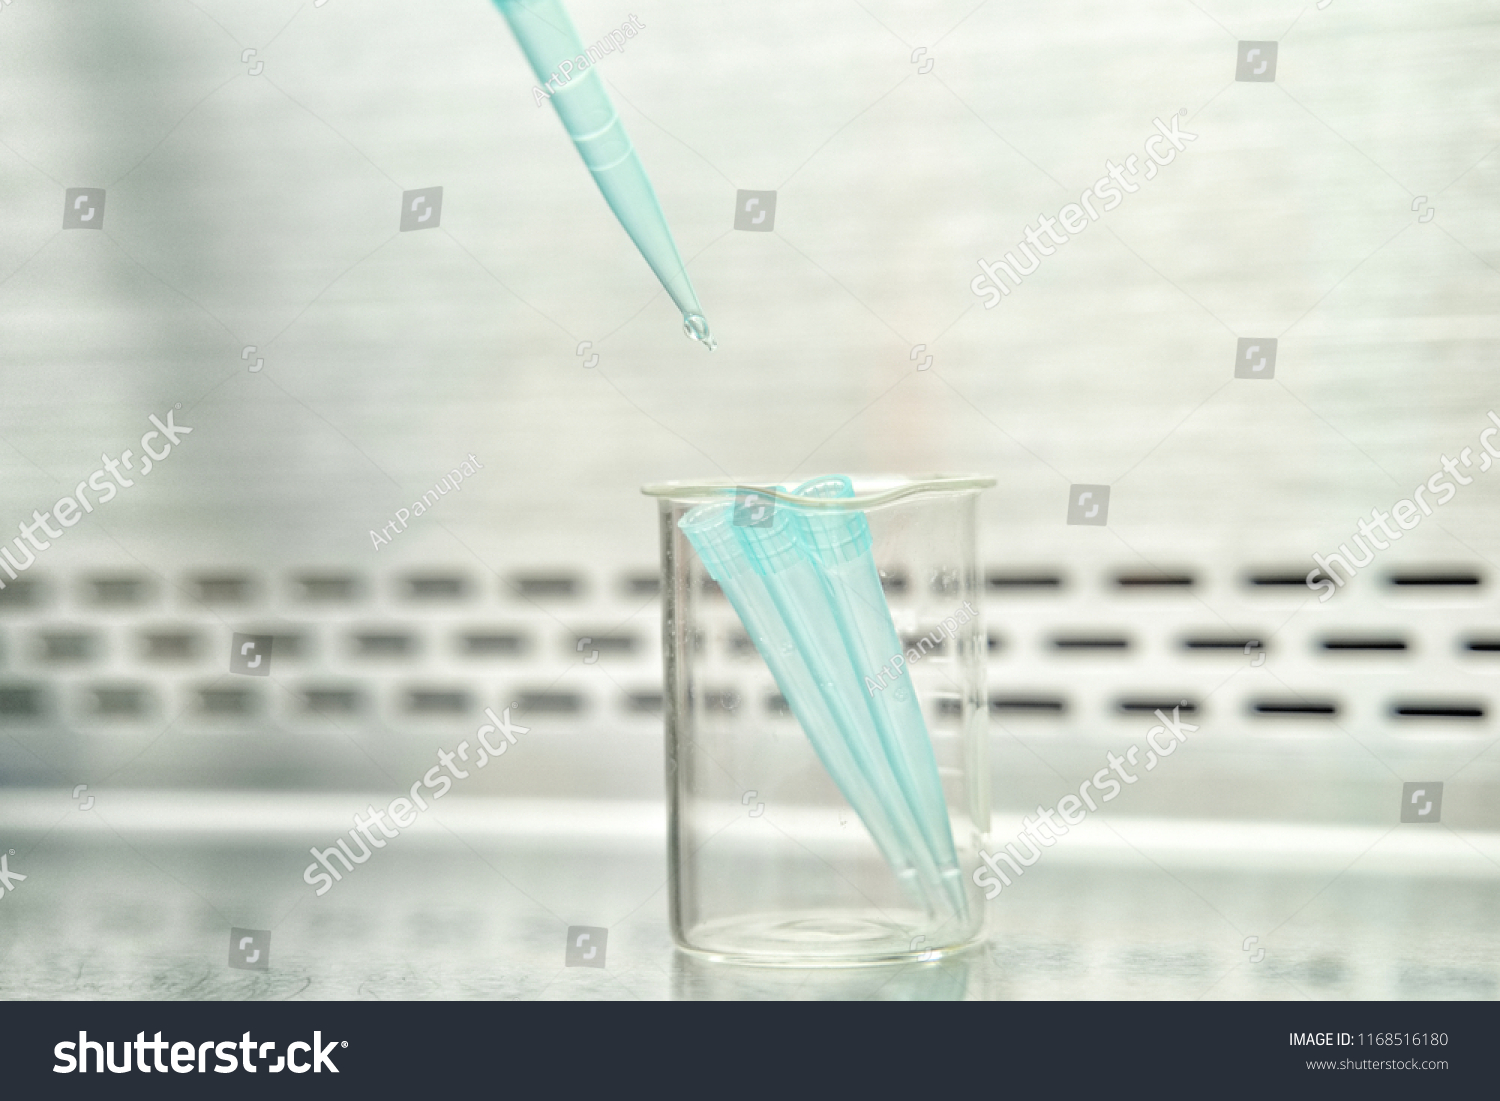 The researcher using pipette and splitting pipette tip from pipette in the lab test. #1168516180